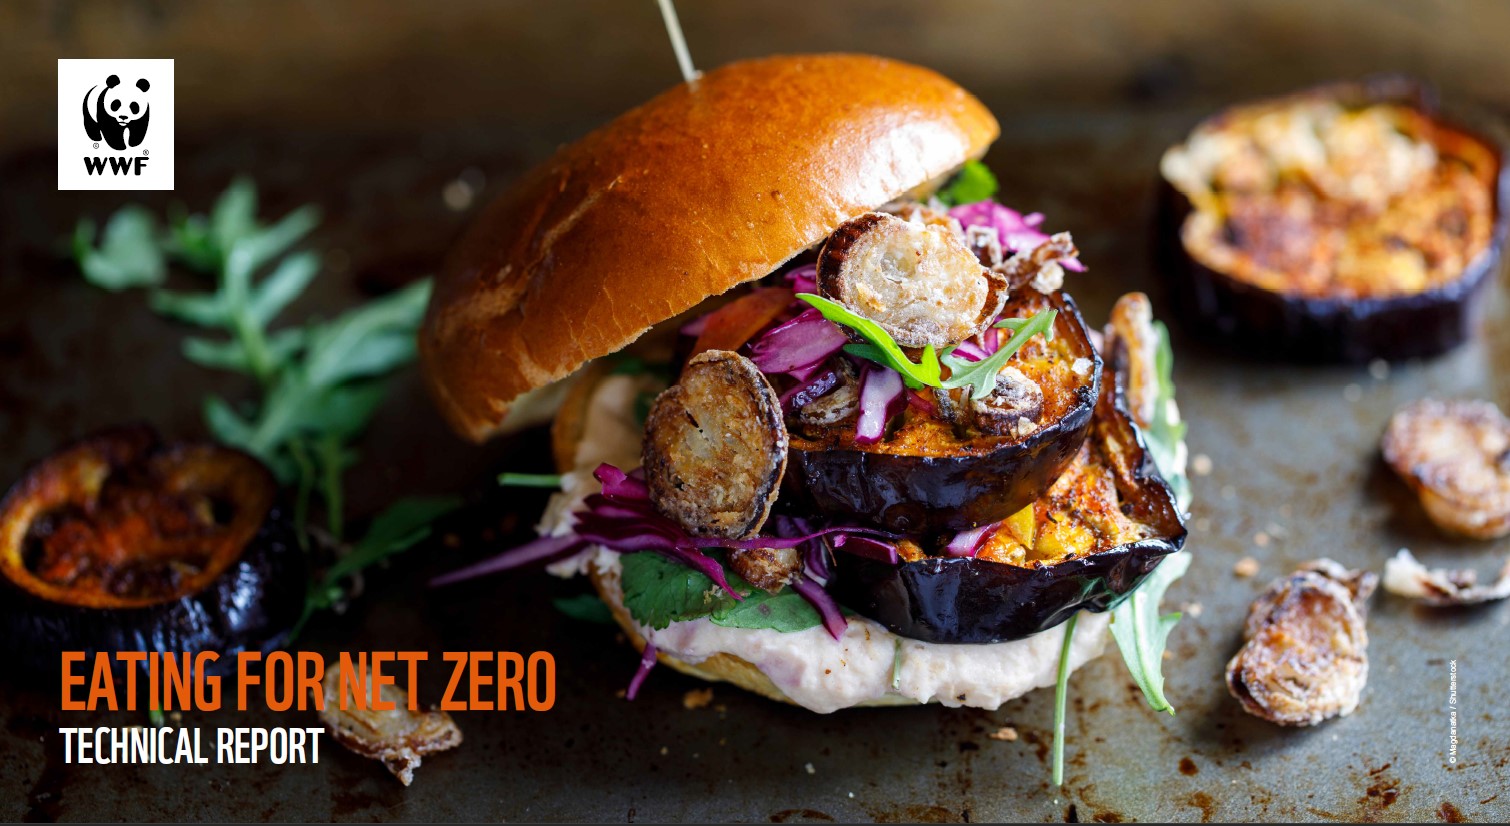 Eating for net zero technical report thumbnail. Image of a plant-based burger